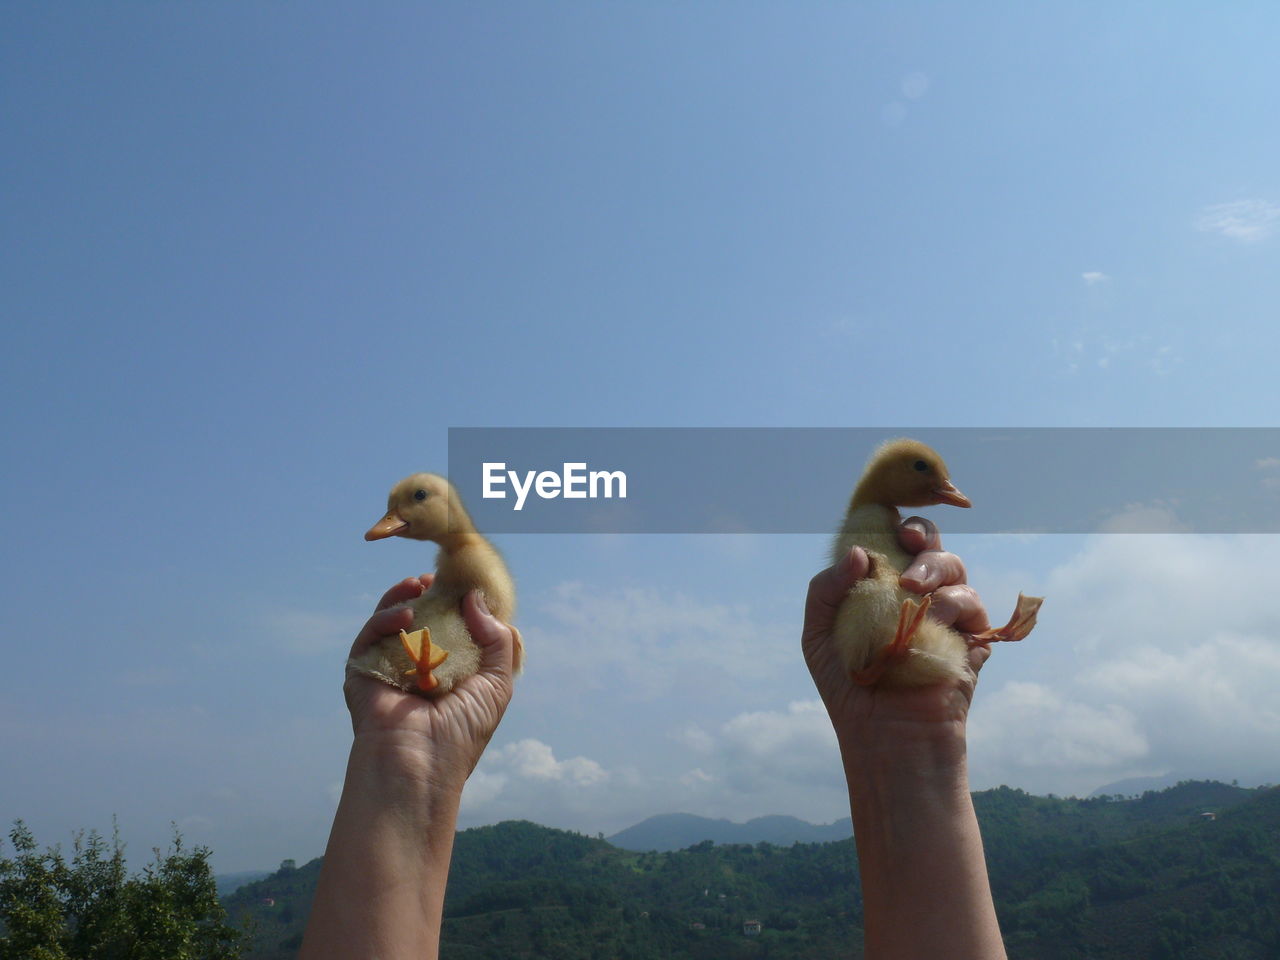 Cropped image of hands holding ducklings against sky